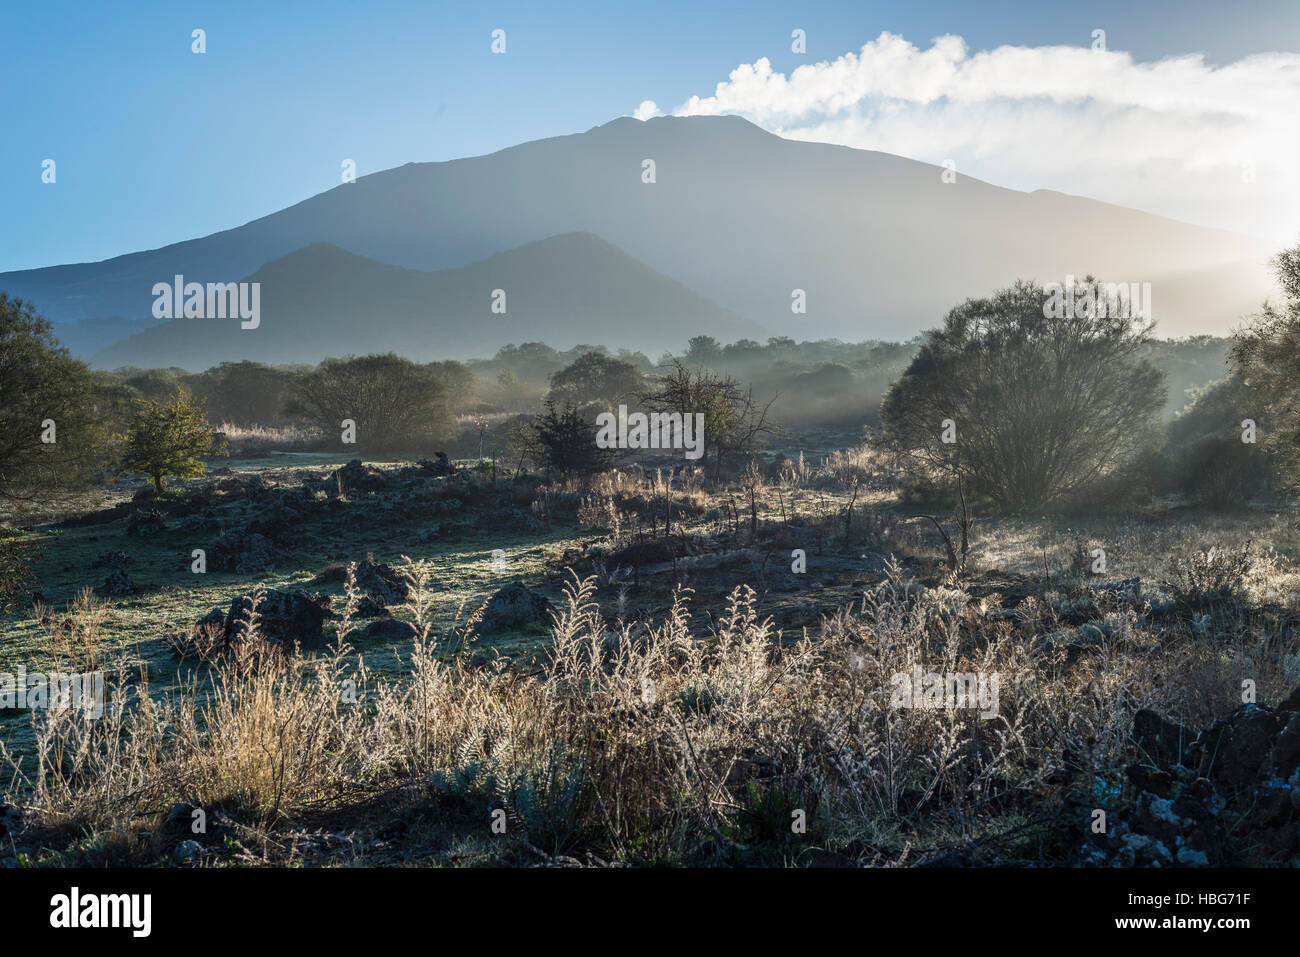 Piano dei Grilli, morning mists, Mount Ruvolo, western flank of Mount Etna, volcanoes, Bronte, Sicily, Italy Stock Photo